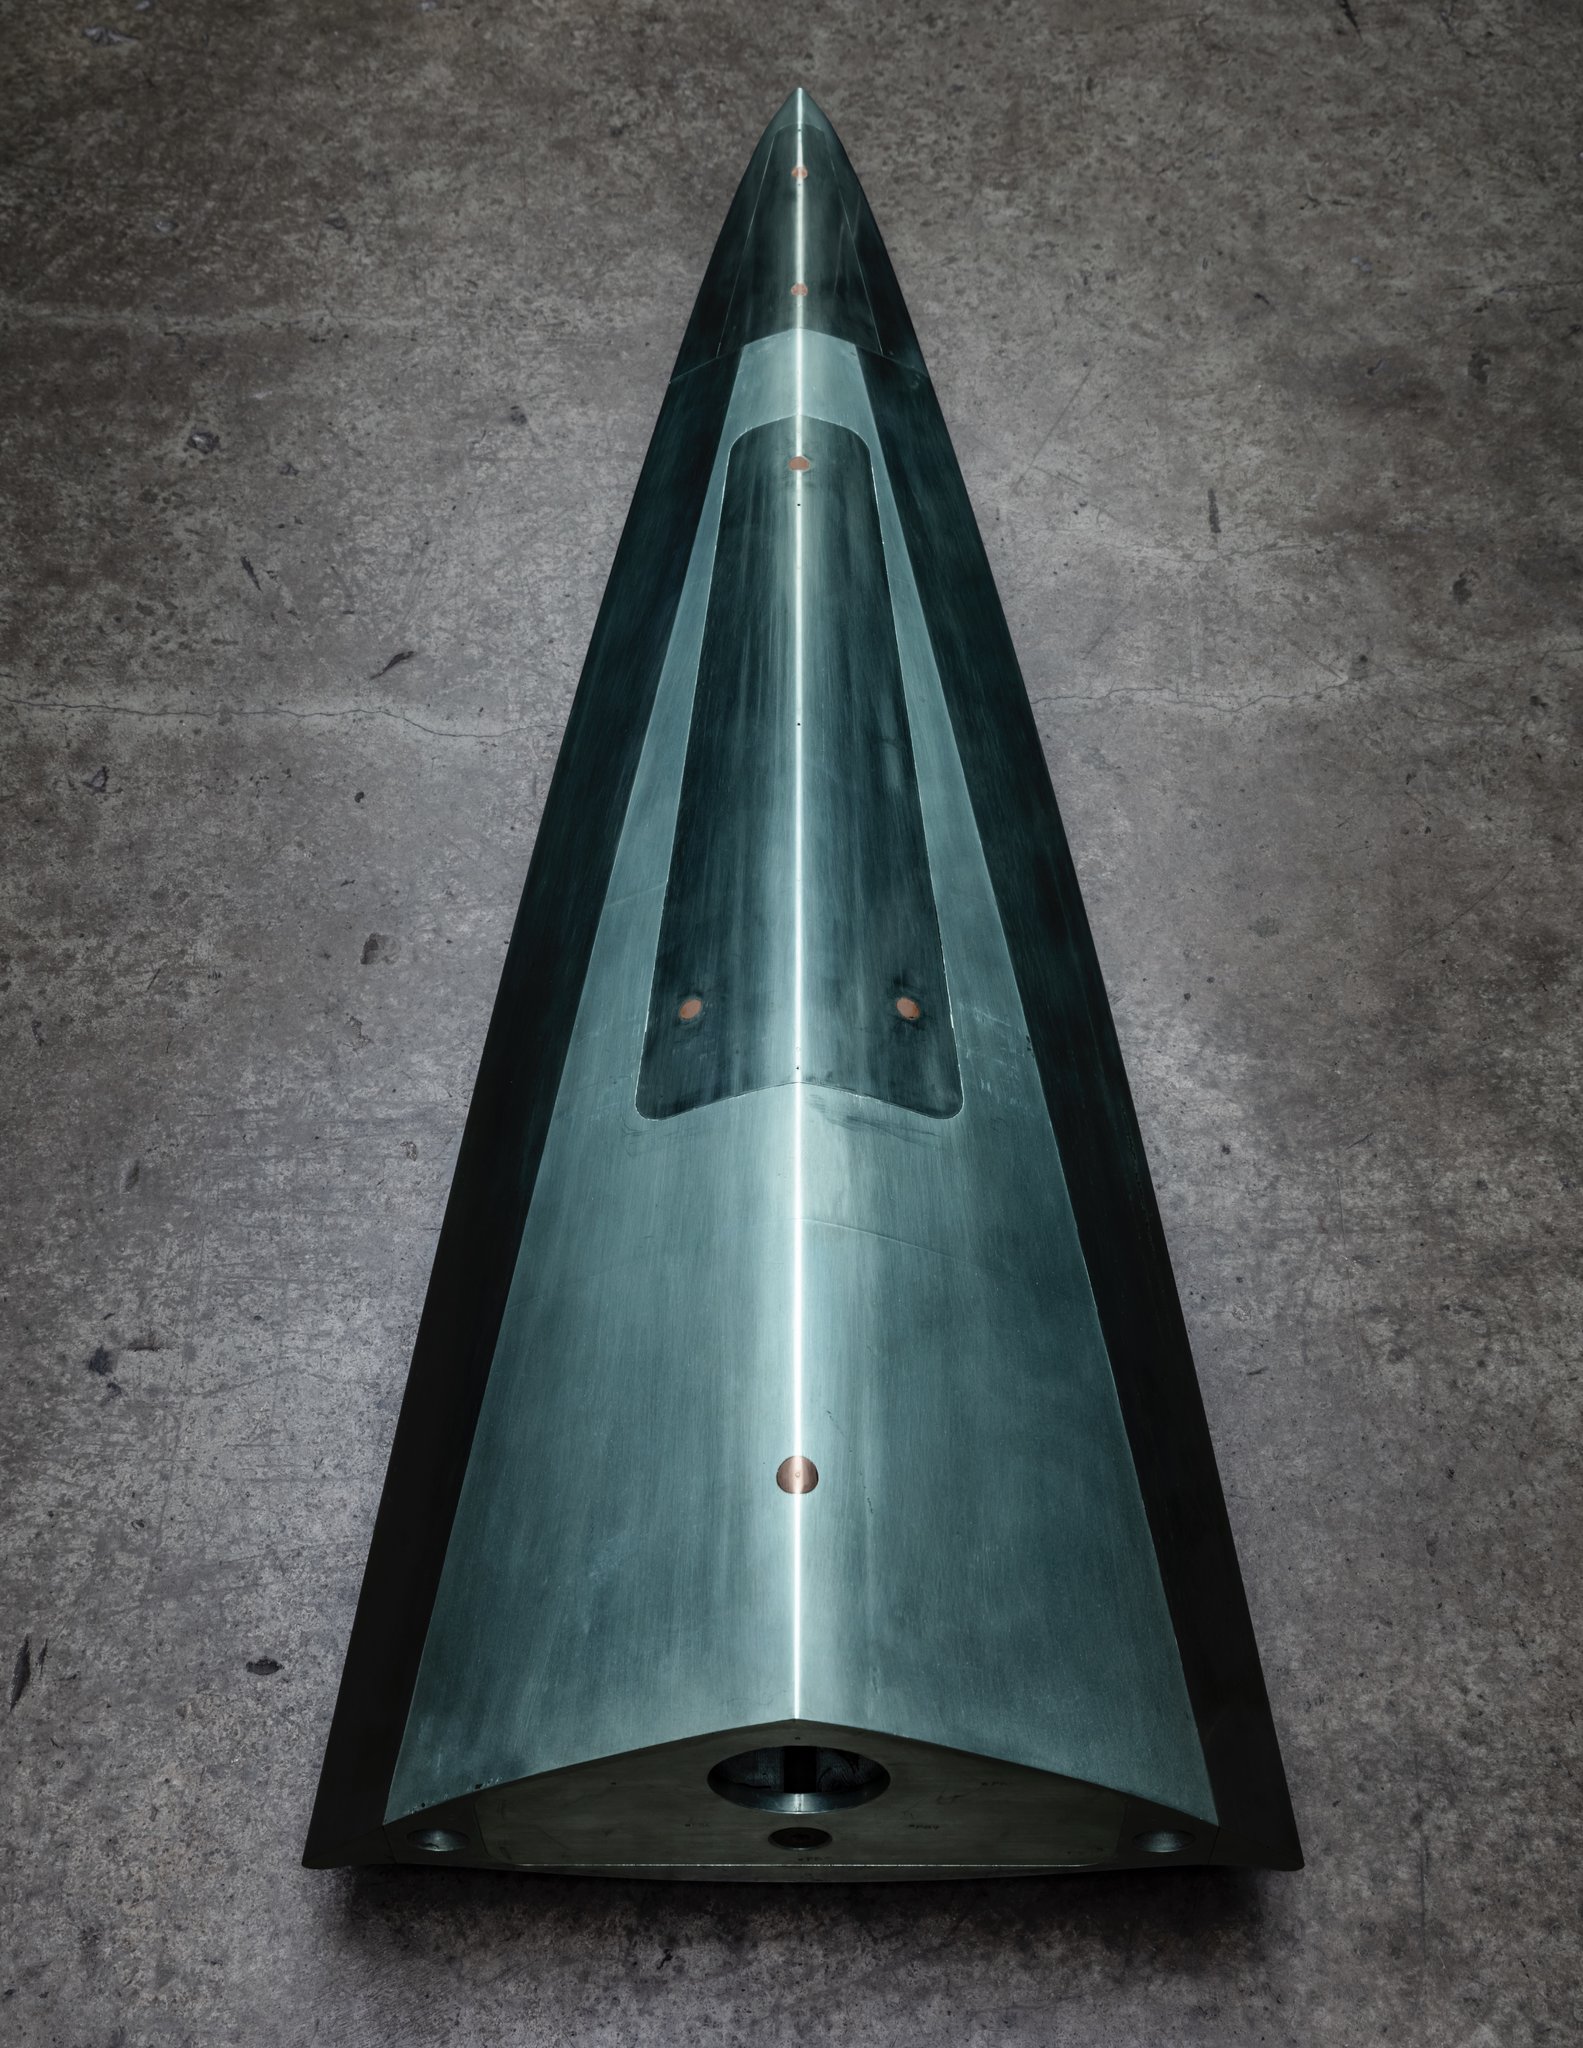 A Mach 14 Waverider glide vehicle, which takes its name from its ability to generate high lift and ride on its own shock waves. This shape is representative of the type of systems the United States is developing today. Credit: Dan Winters for The New York Times